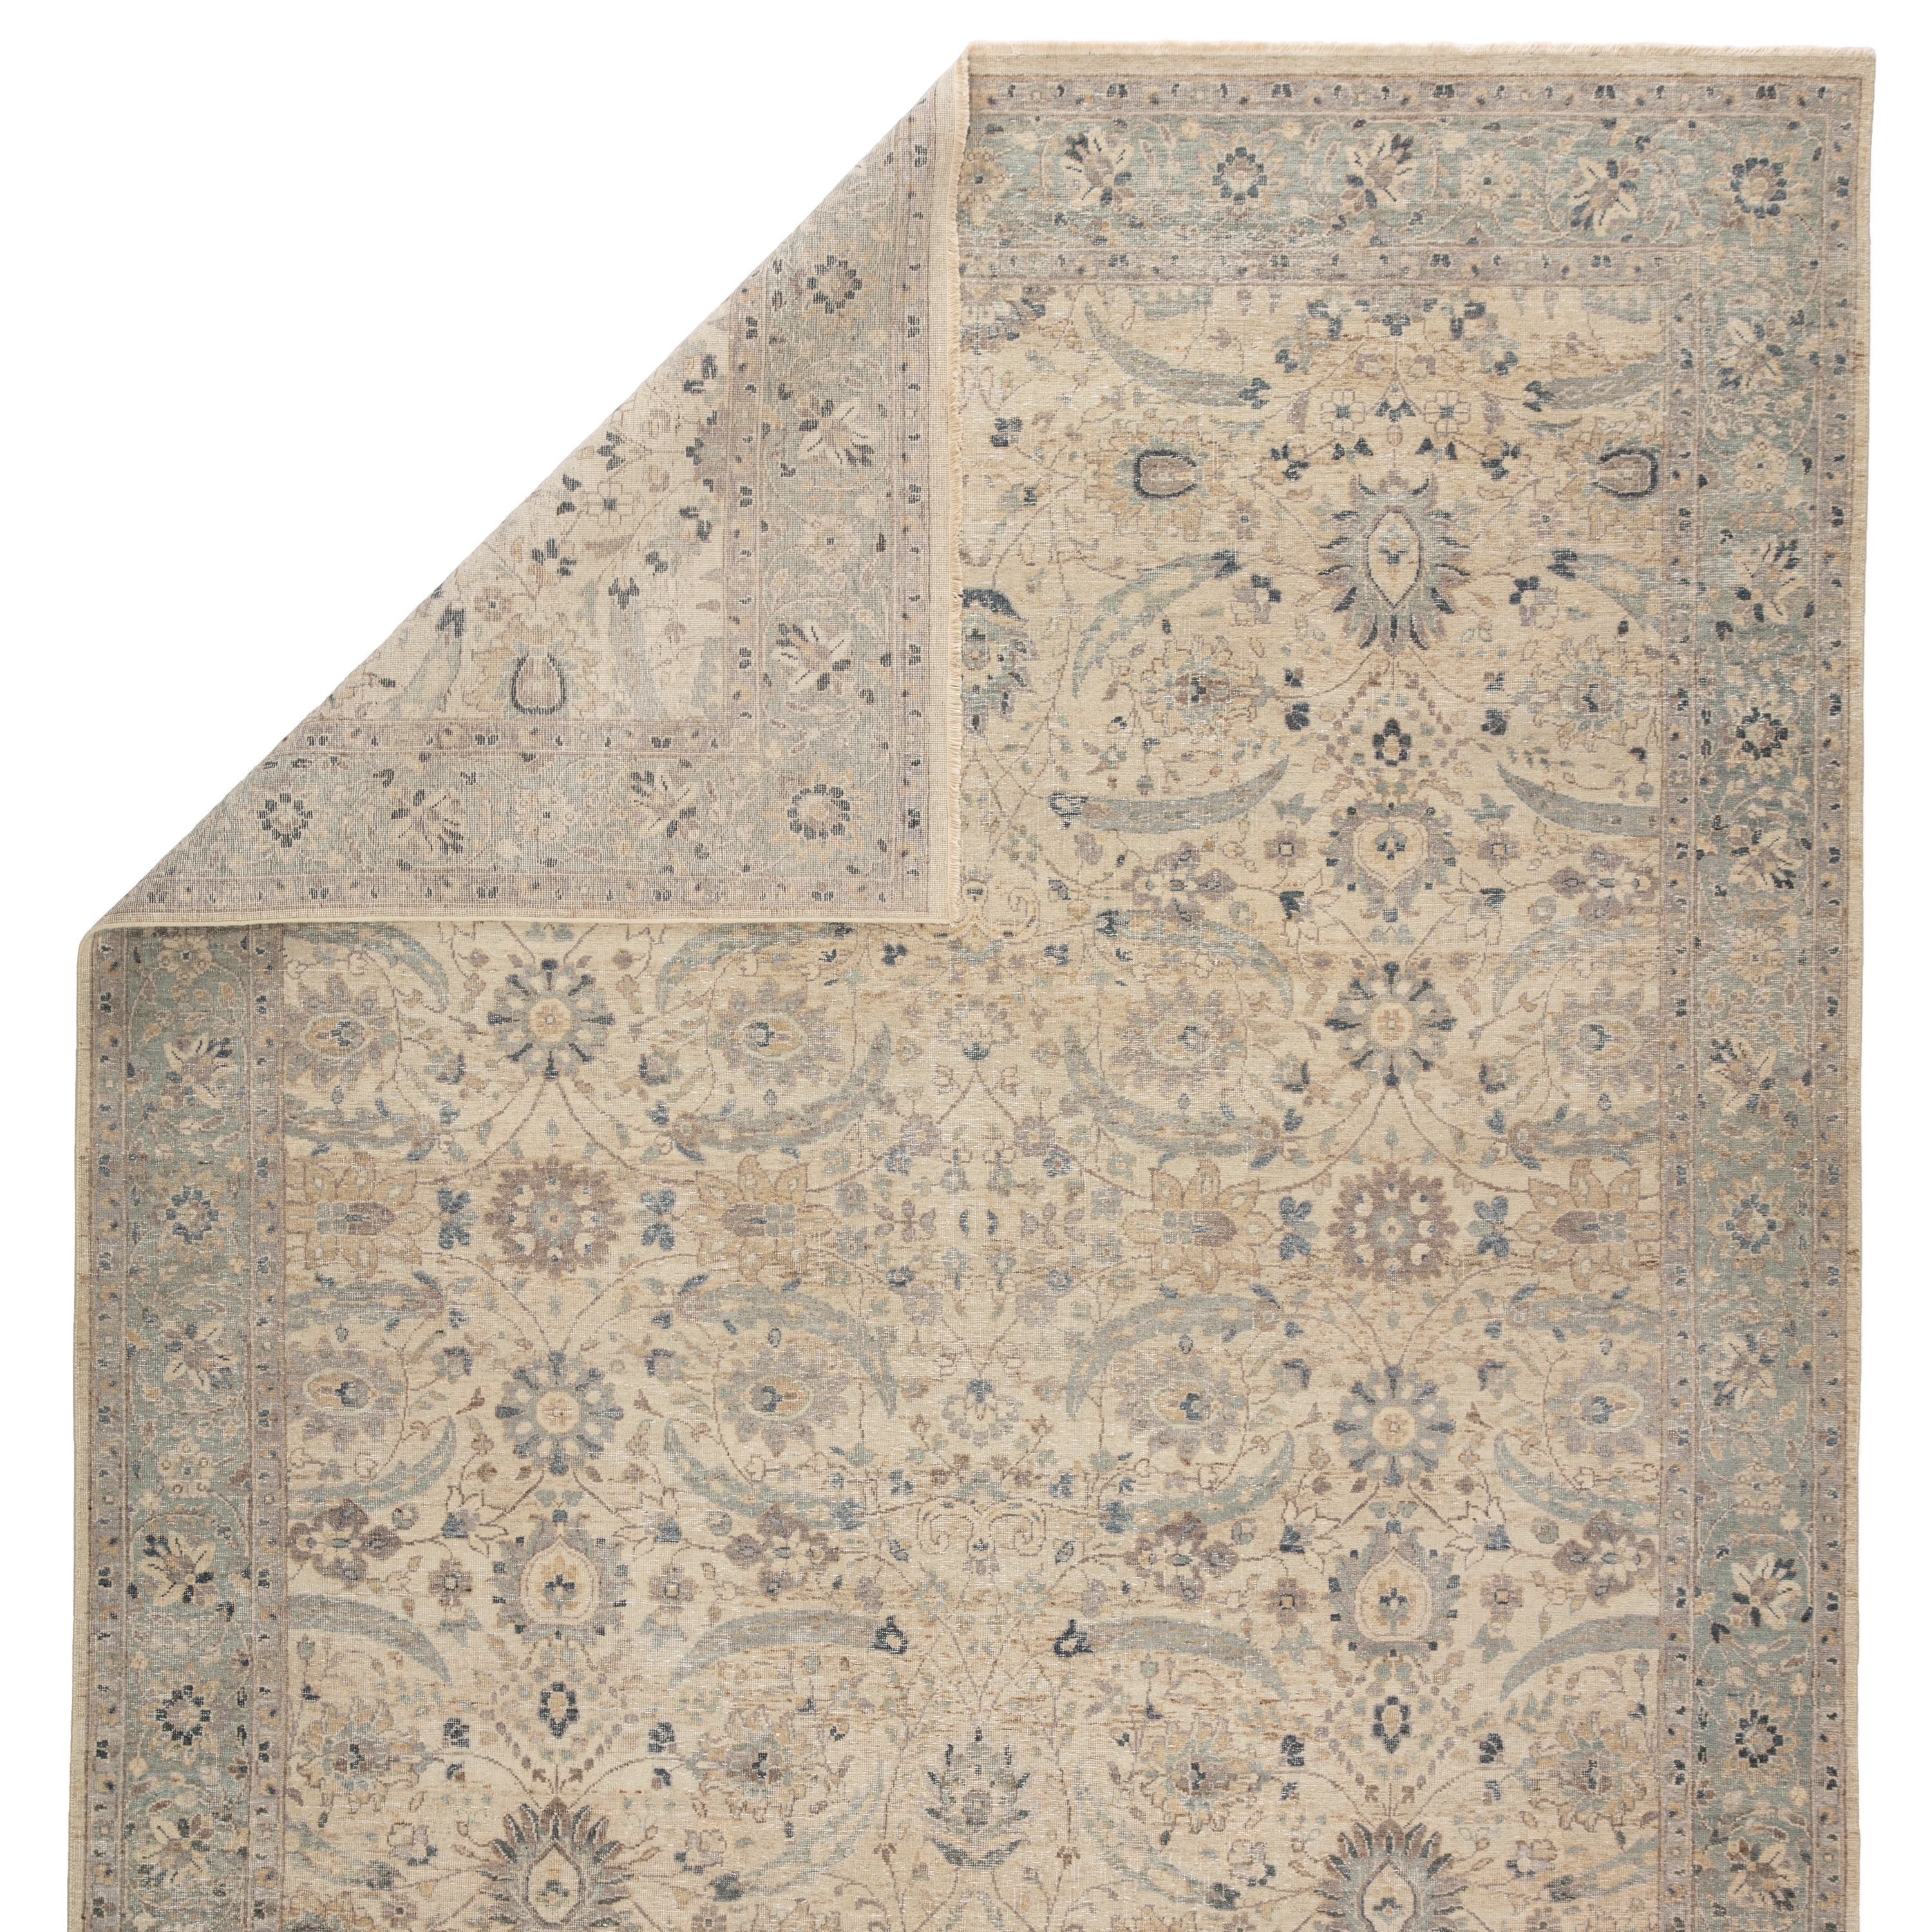 Merey Hand-Knotted Oriental Gray/ Beige Area Rug (9'X12') - Image 2